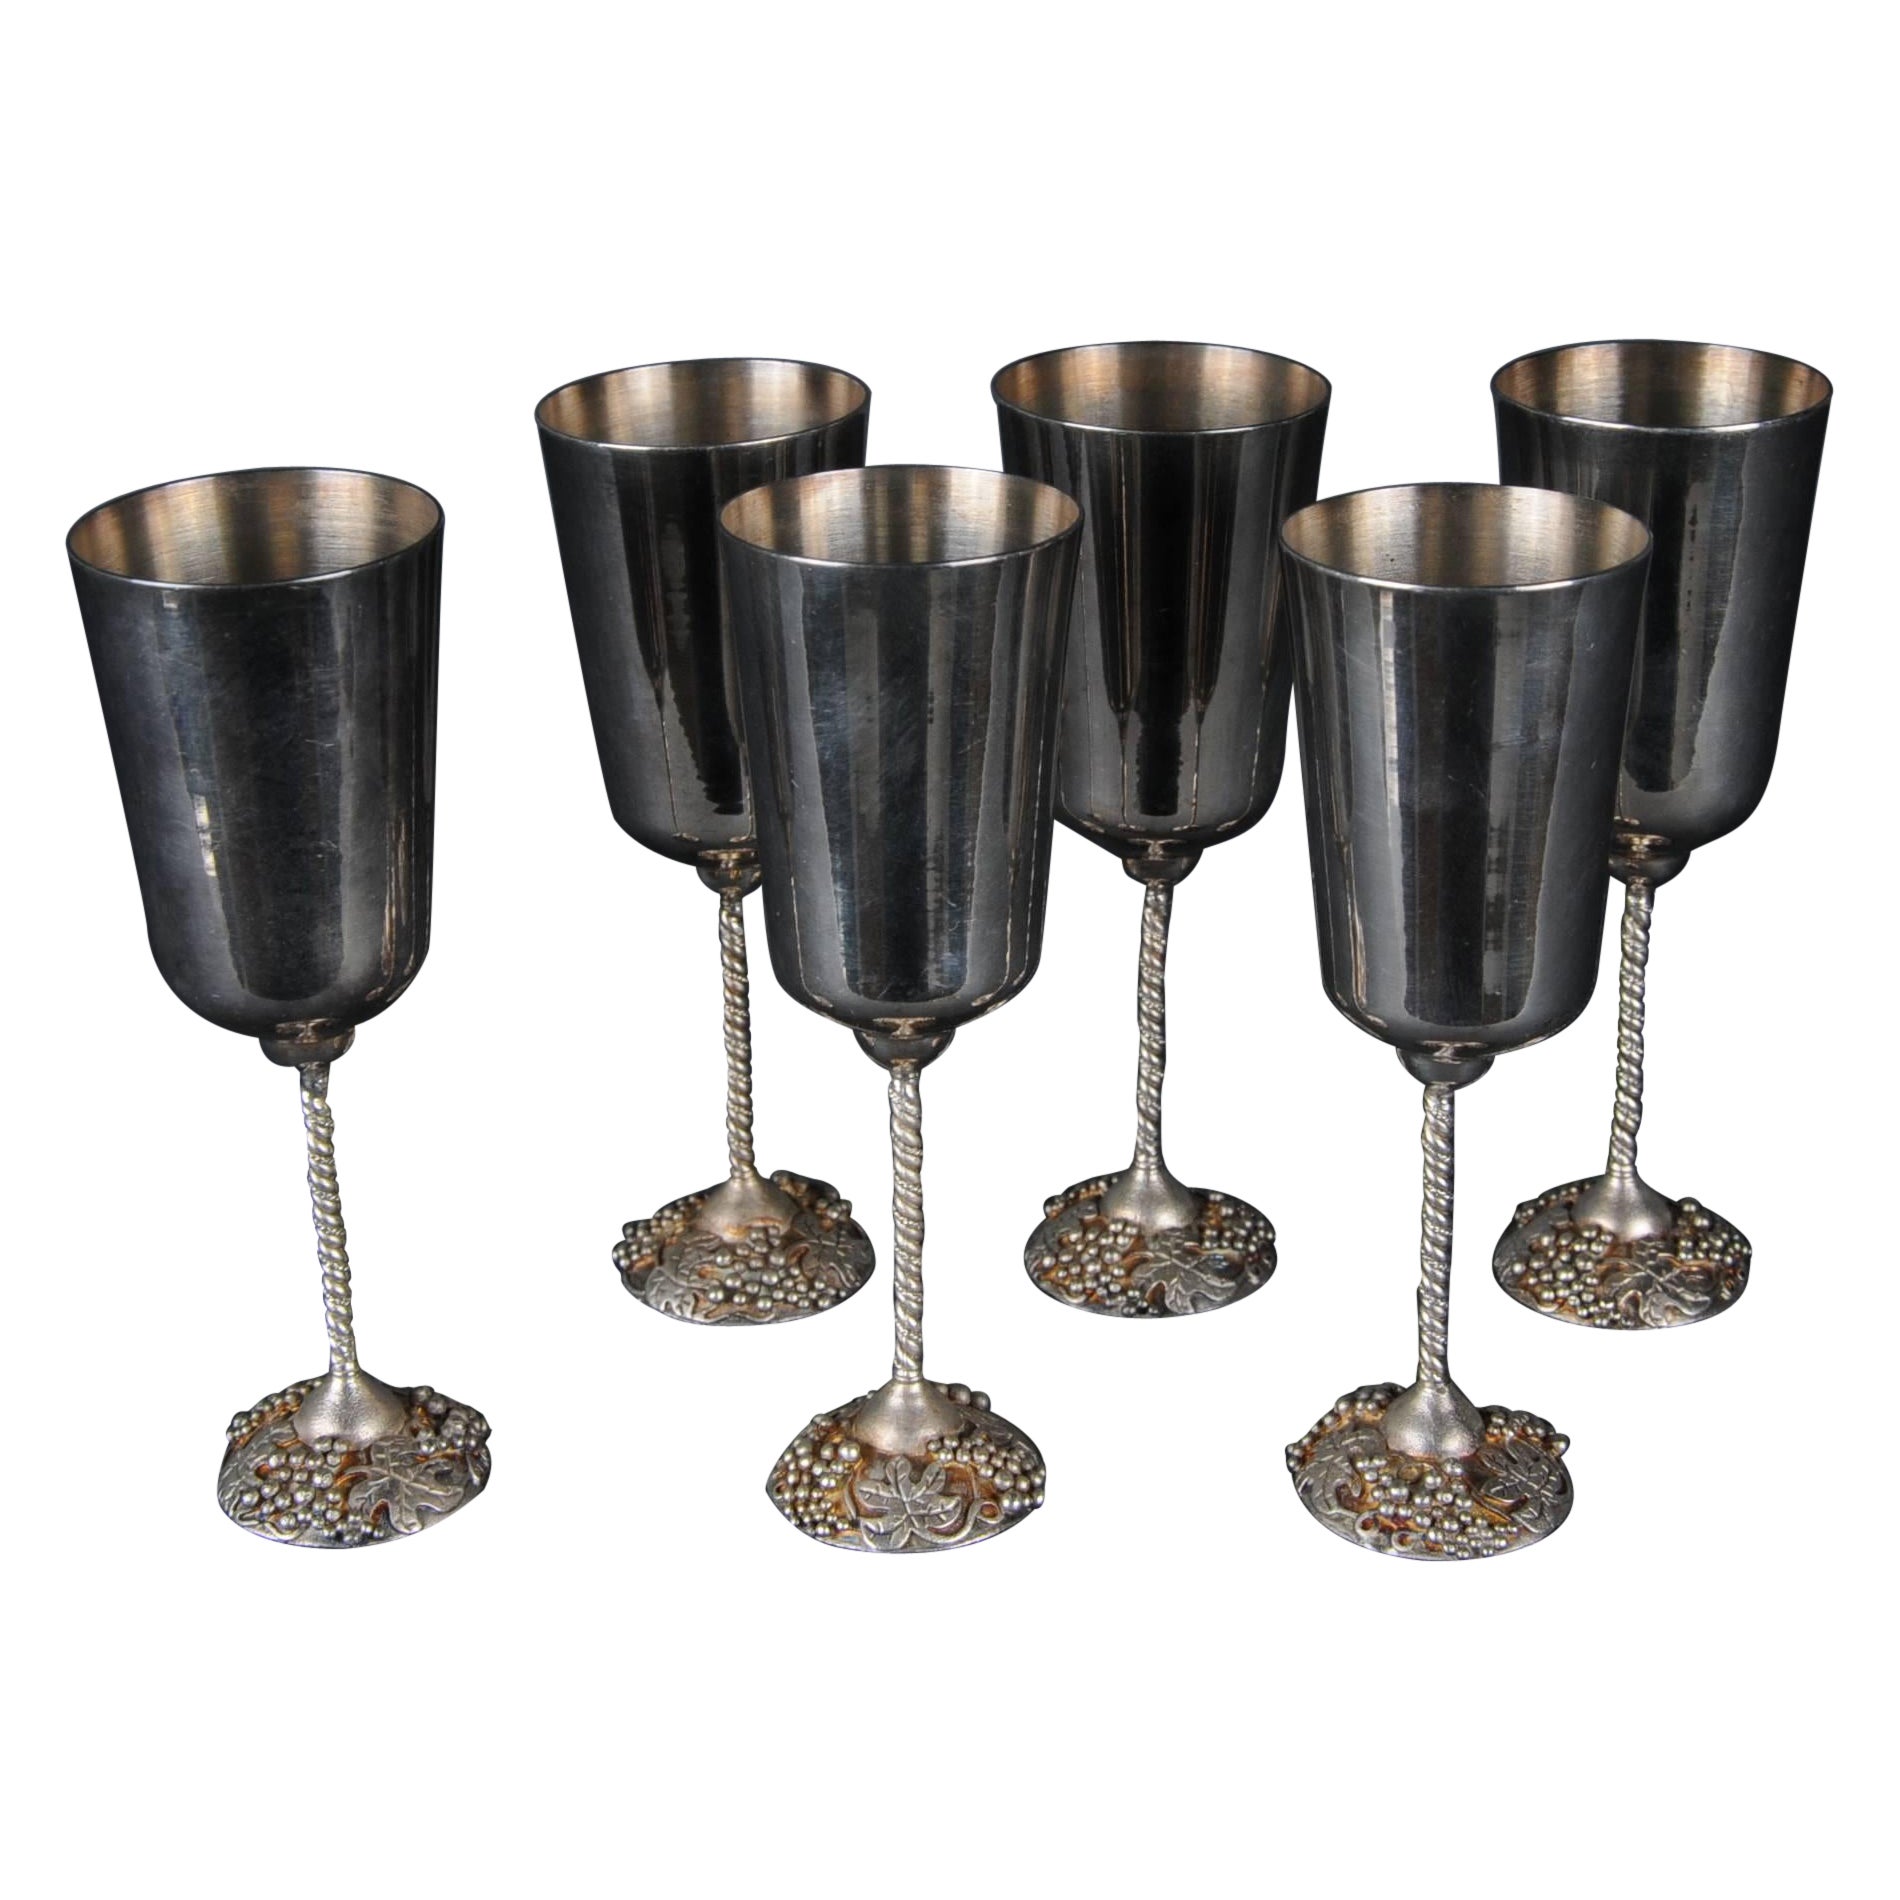 6 High-Quality Silver Spain Chalice Cup Miniature plastic grapes & leaves 